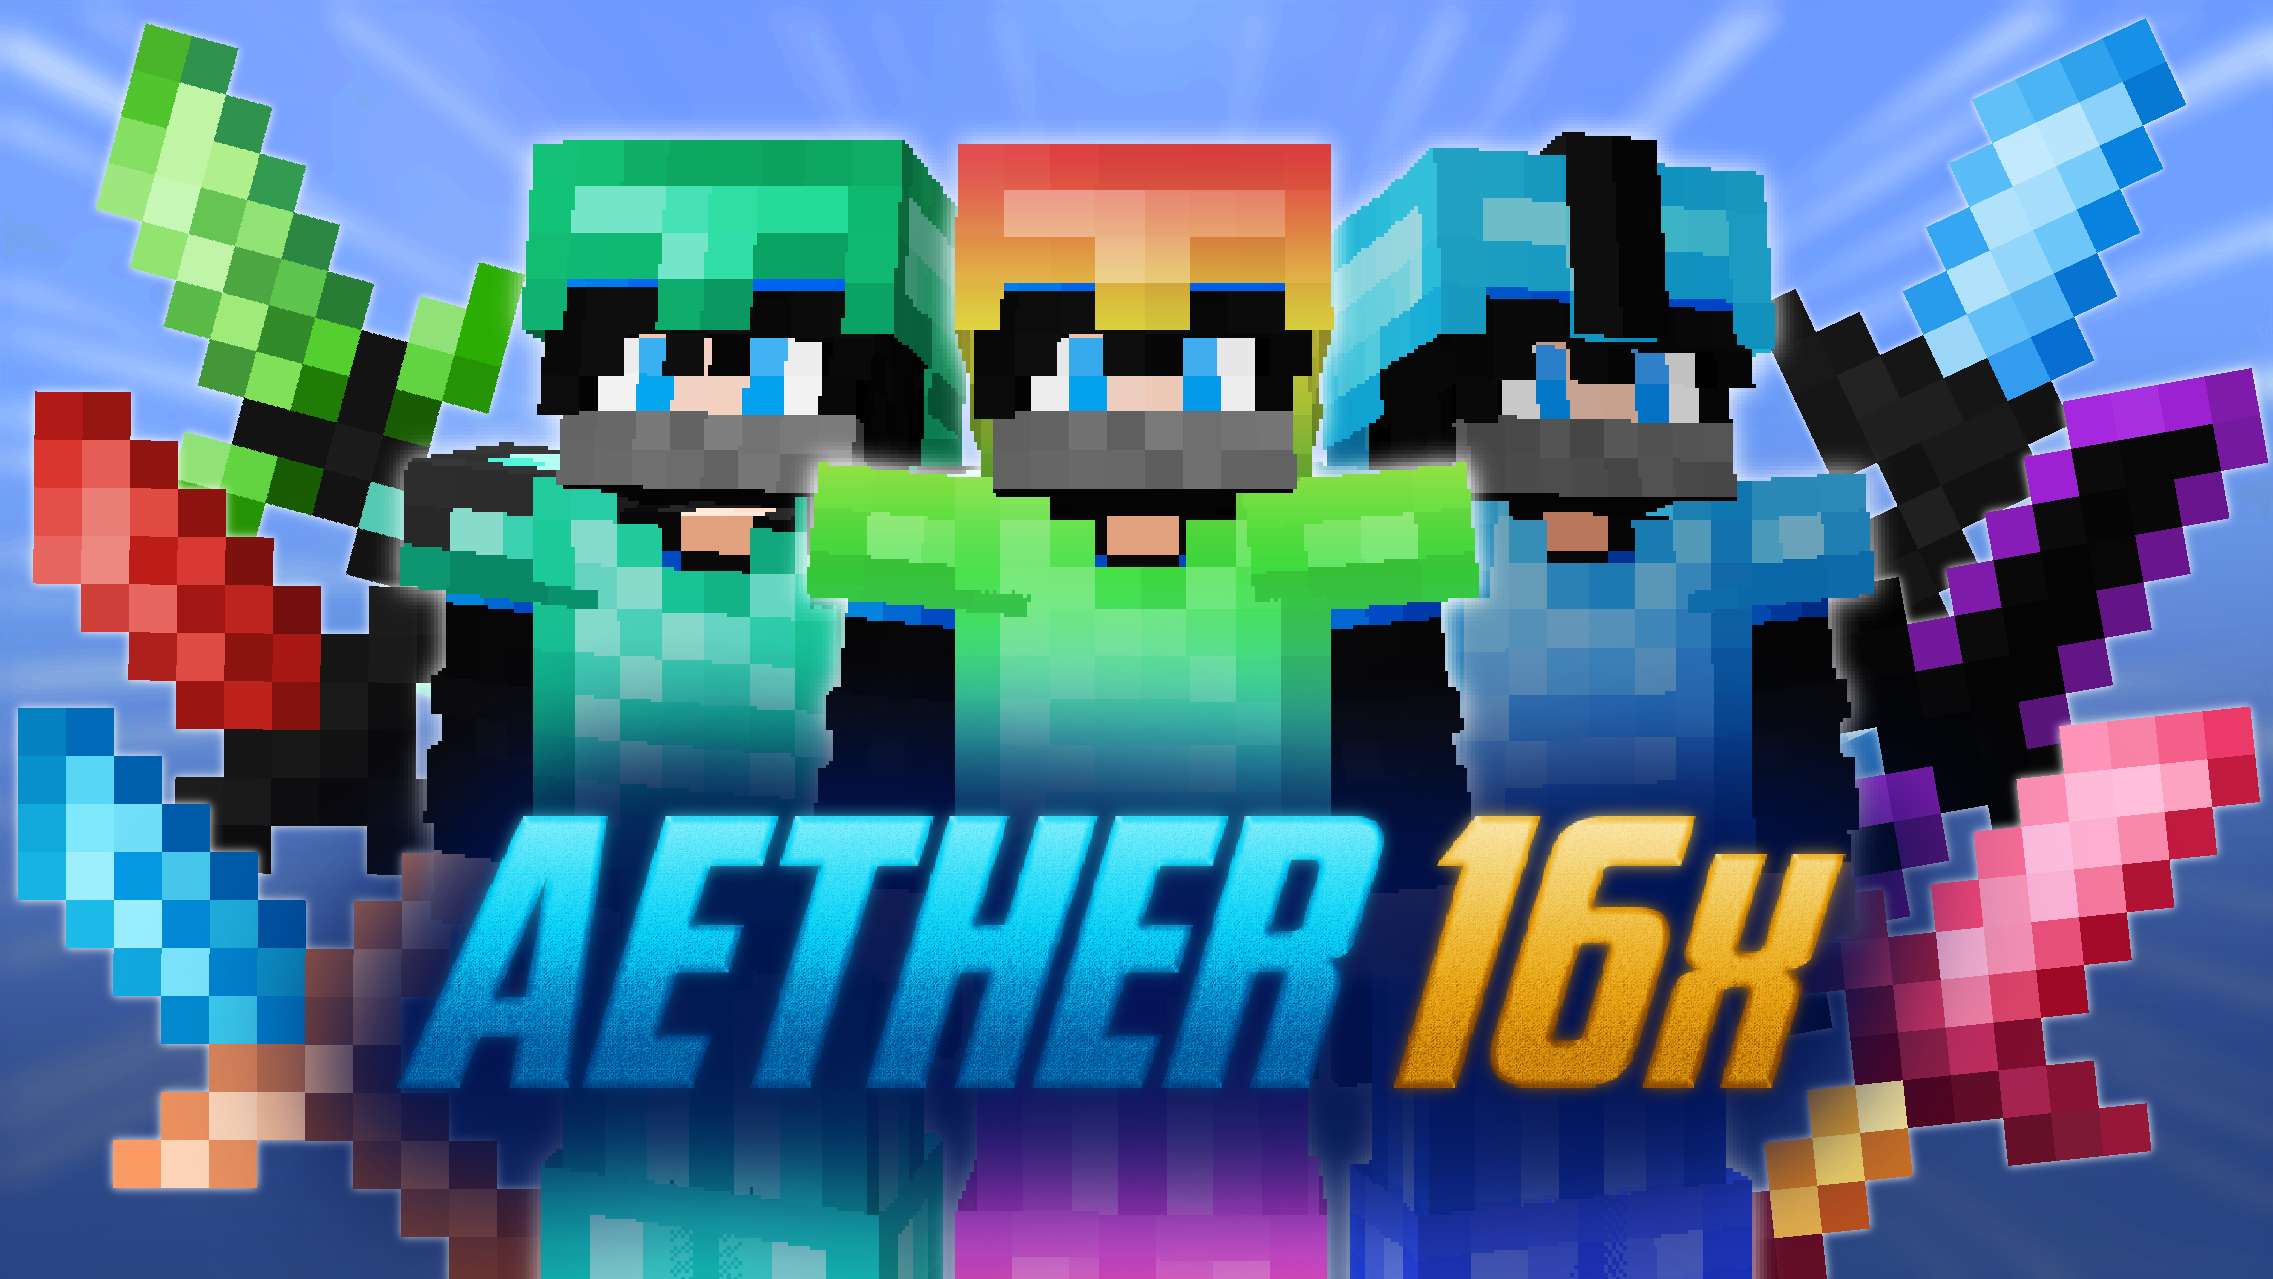 Aether 16x [Zoyr] 16 by Mqryo on PvPRP